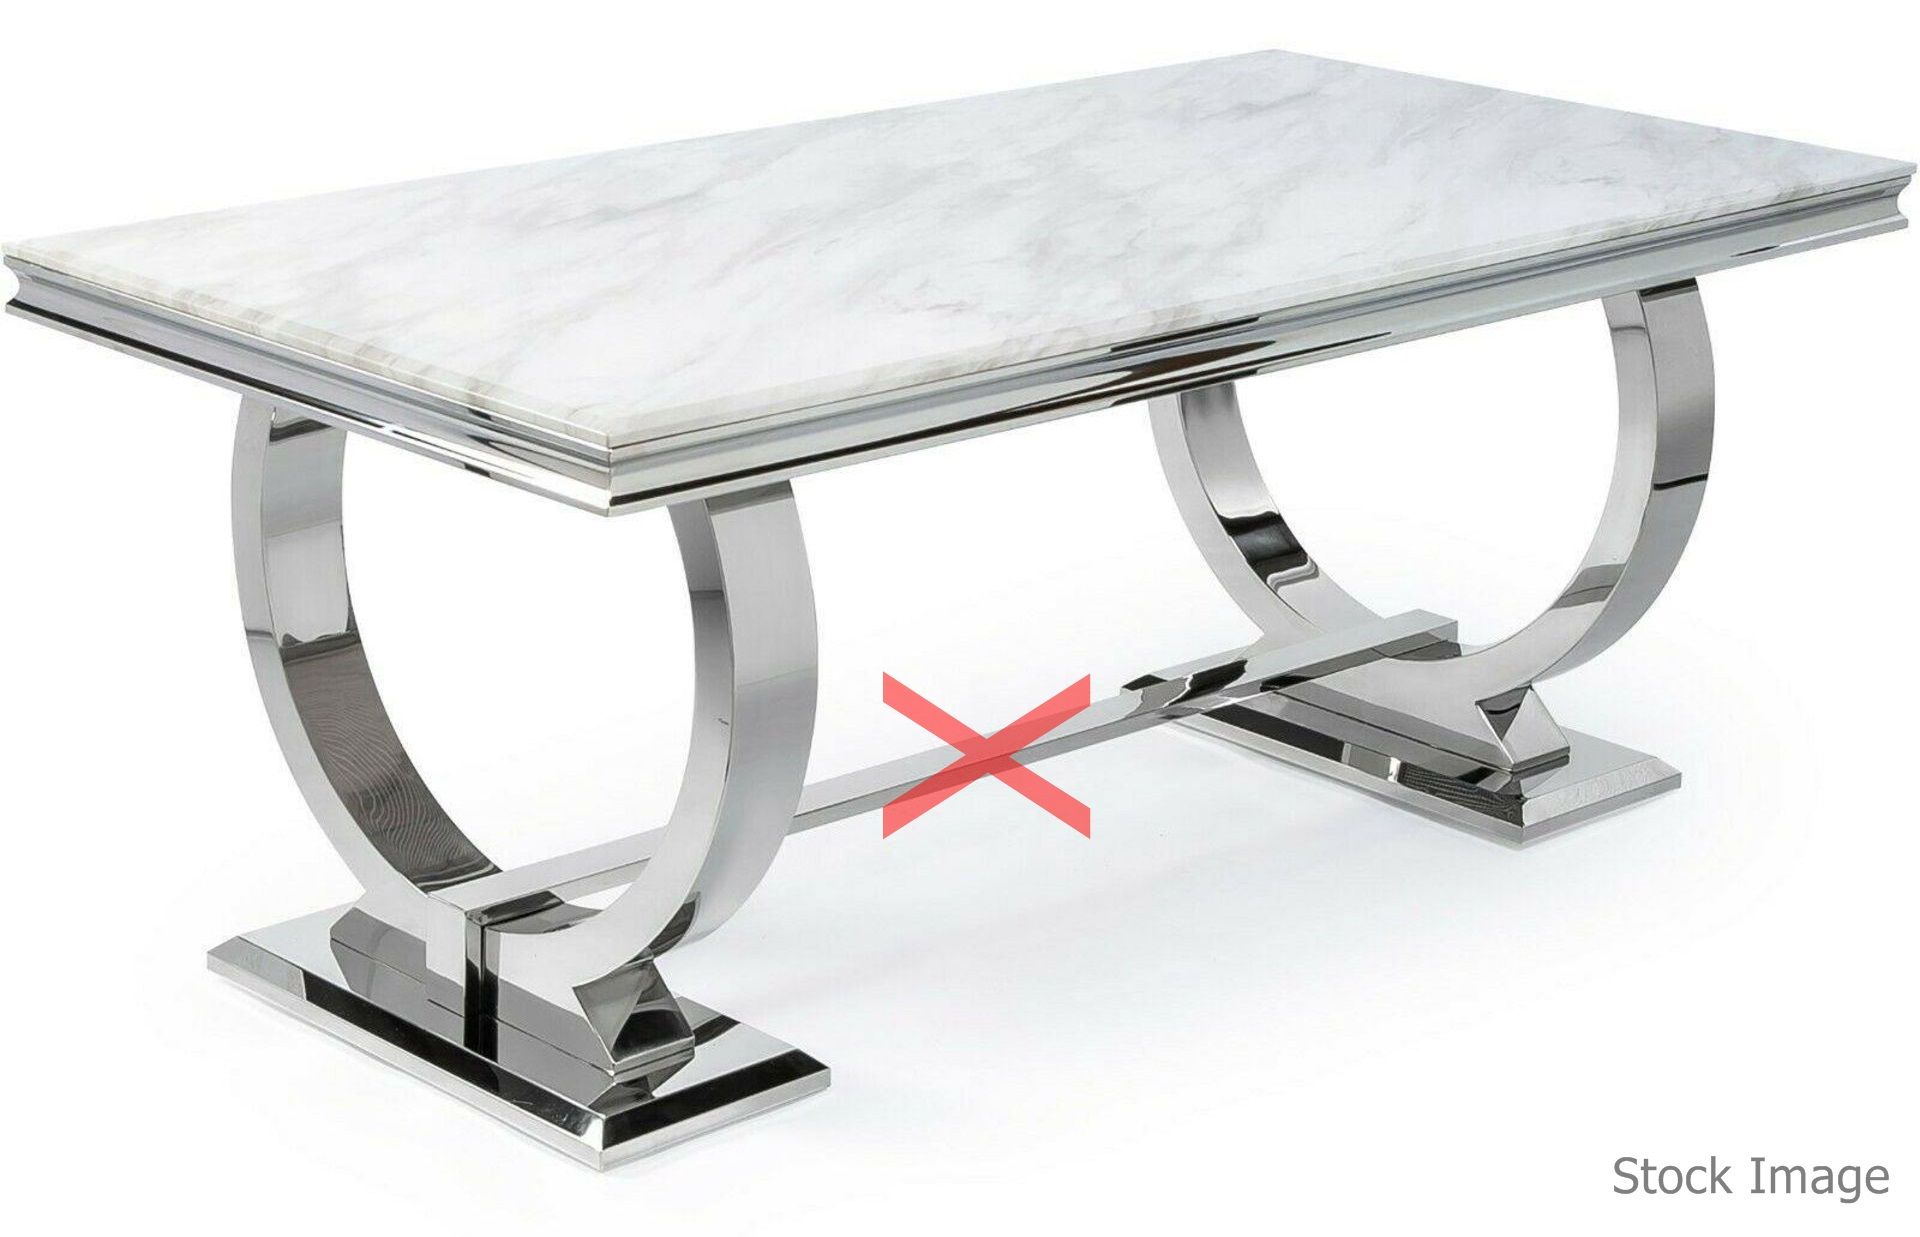 1 x Arianna 2-Metre Long Dining Table With Marble Top With A Chrome Base - Image 10 of 12